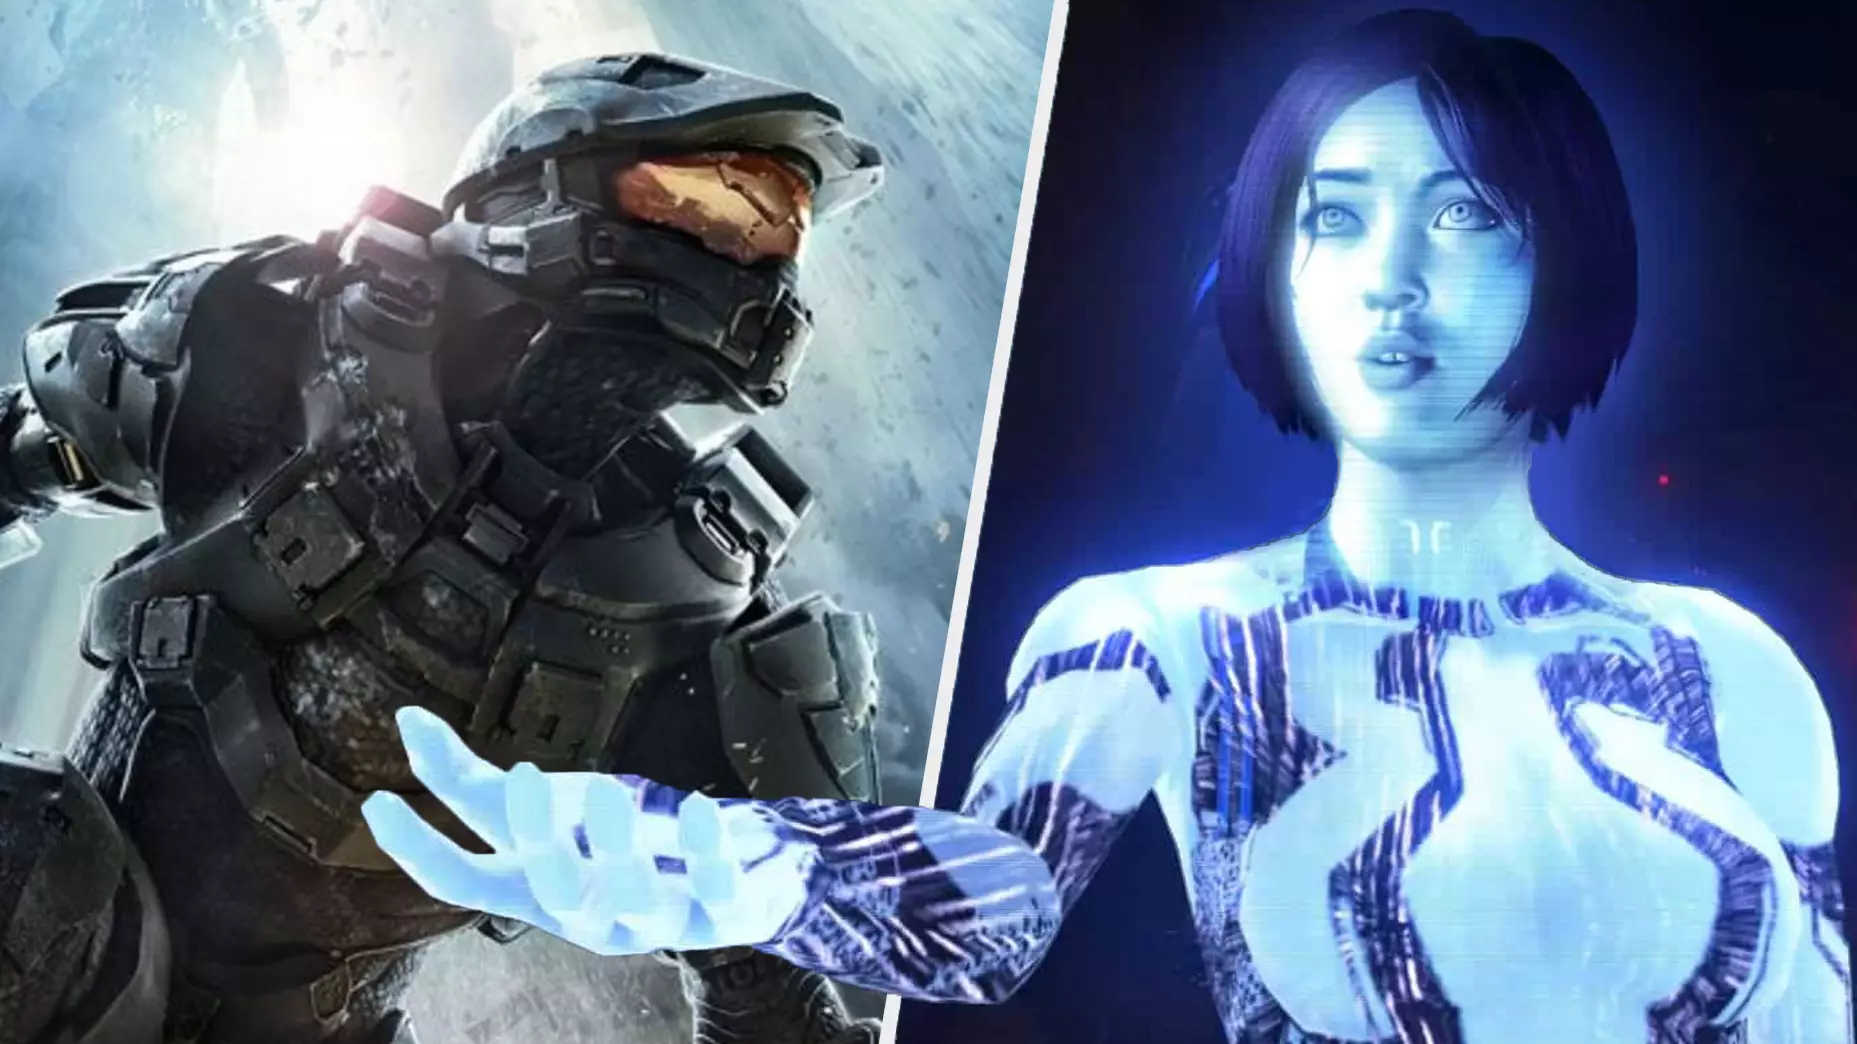 Halo TV Show Will Use The Same Cortana Voice Actress As The Game